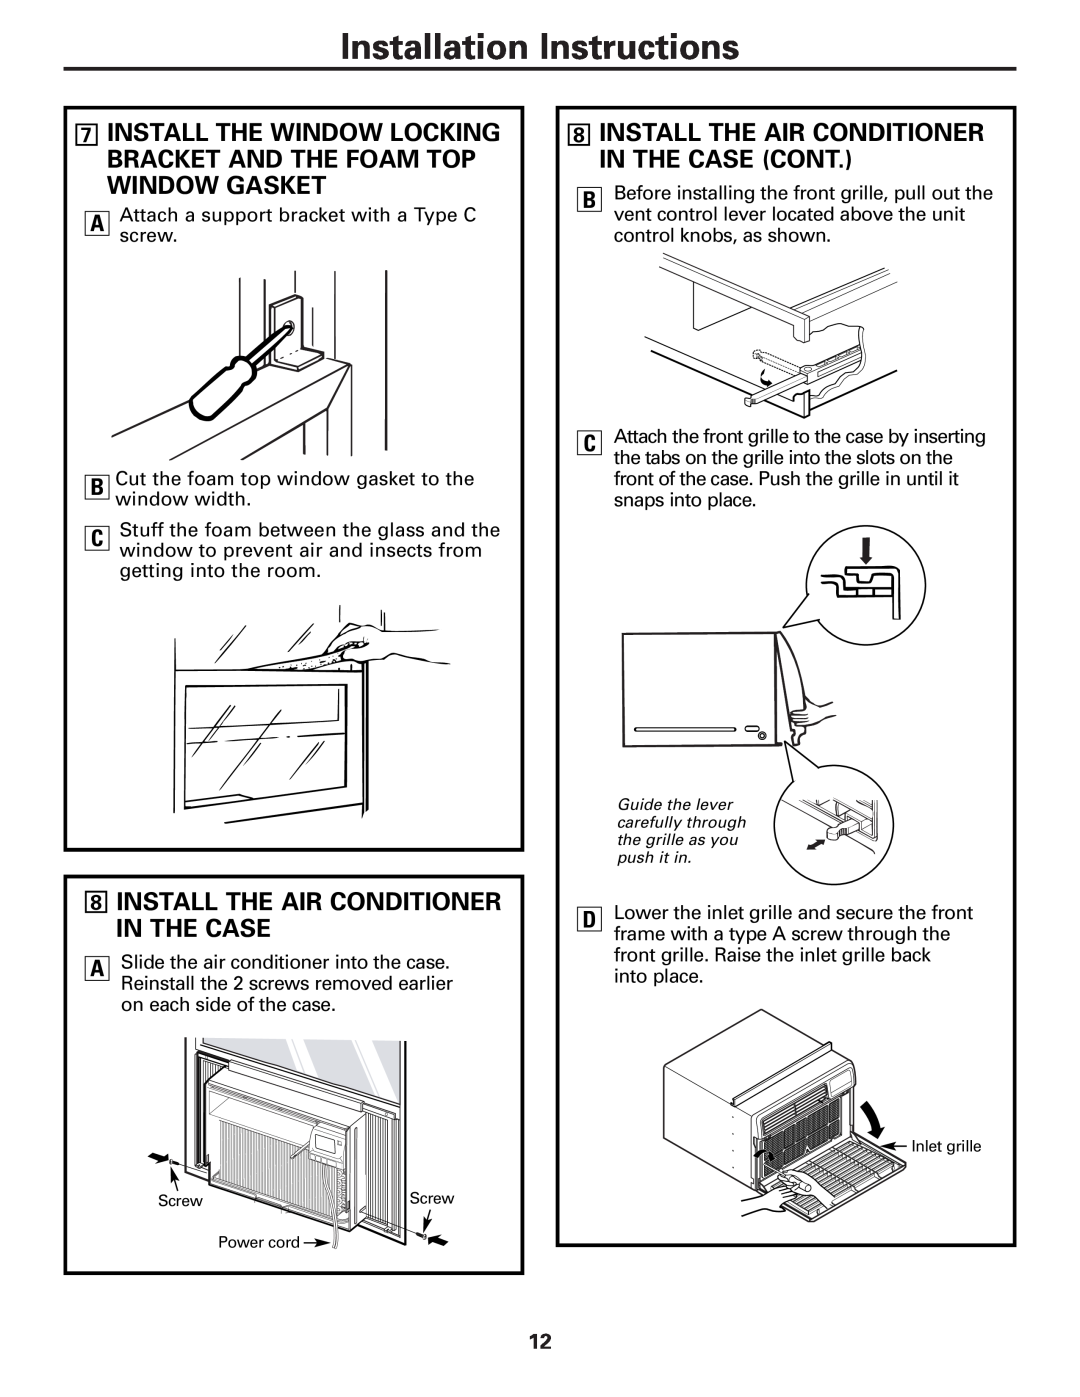 GE AGW18, AGH18 owner manual 8INSTALL THE AIR CONDITIONER IN THE CASE CONT, Installation Instructions 